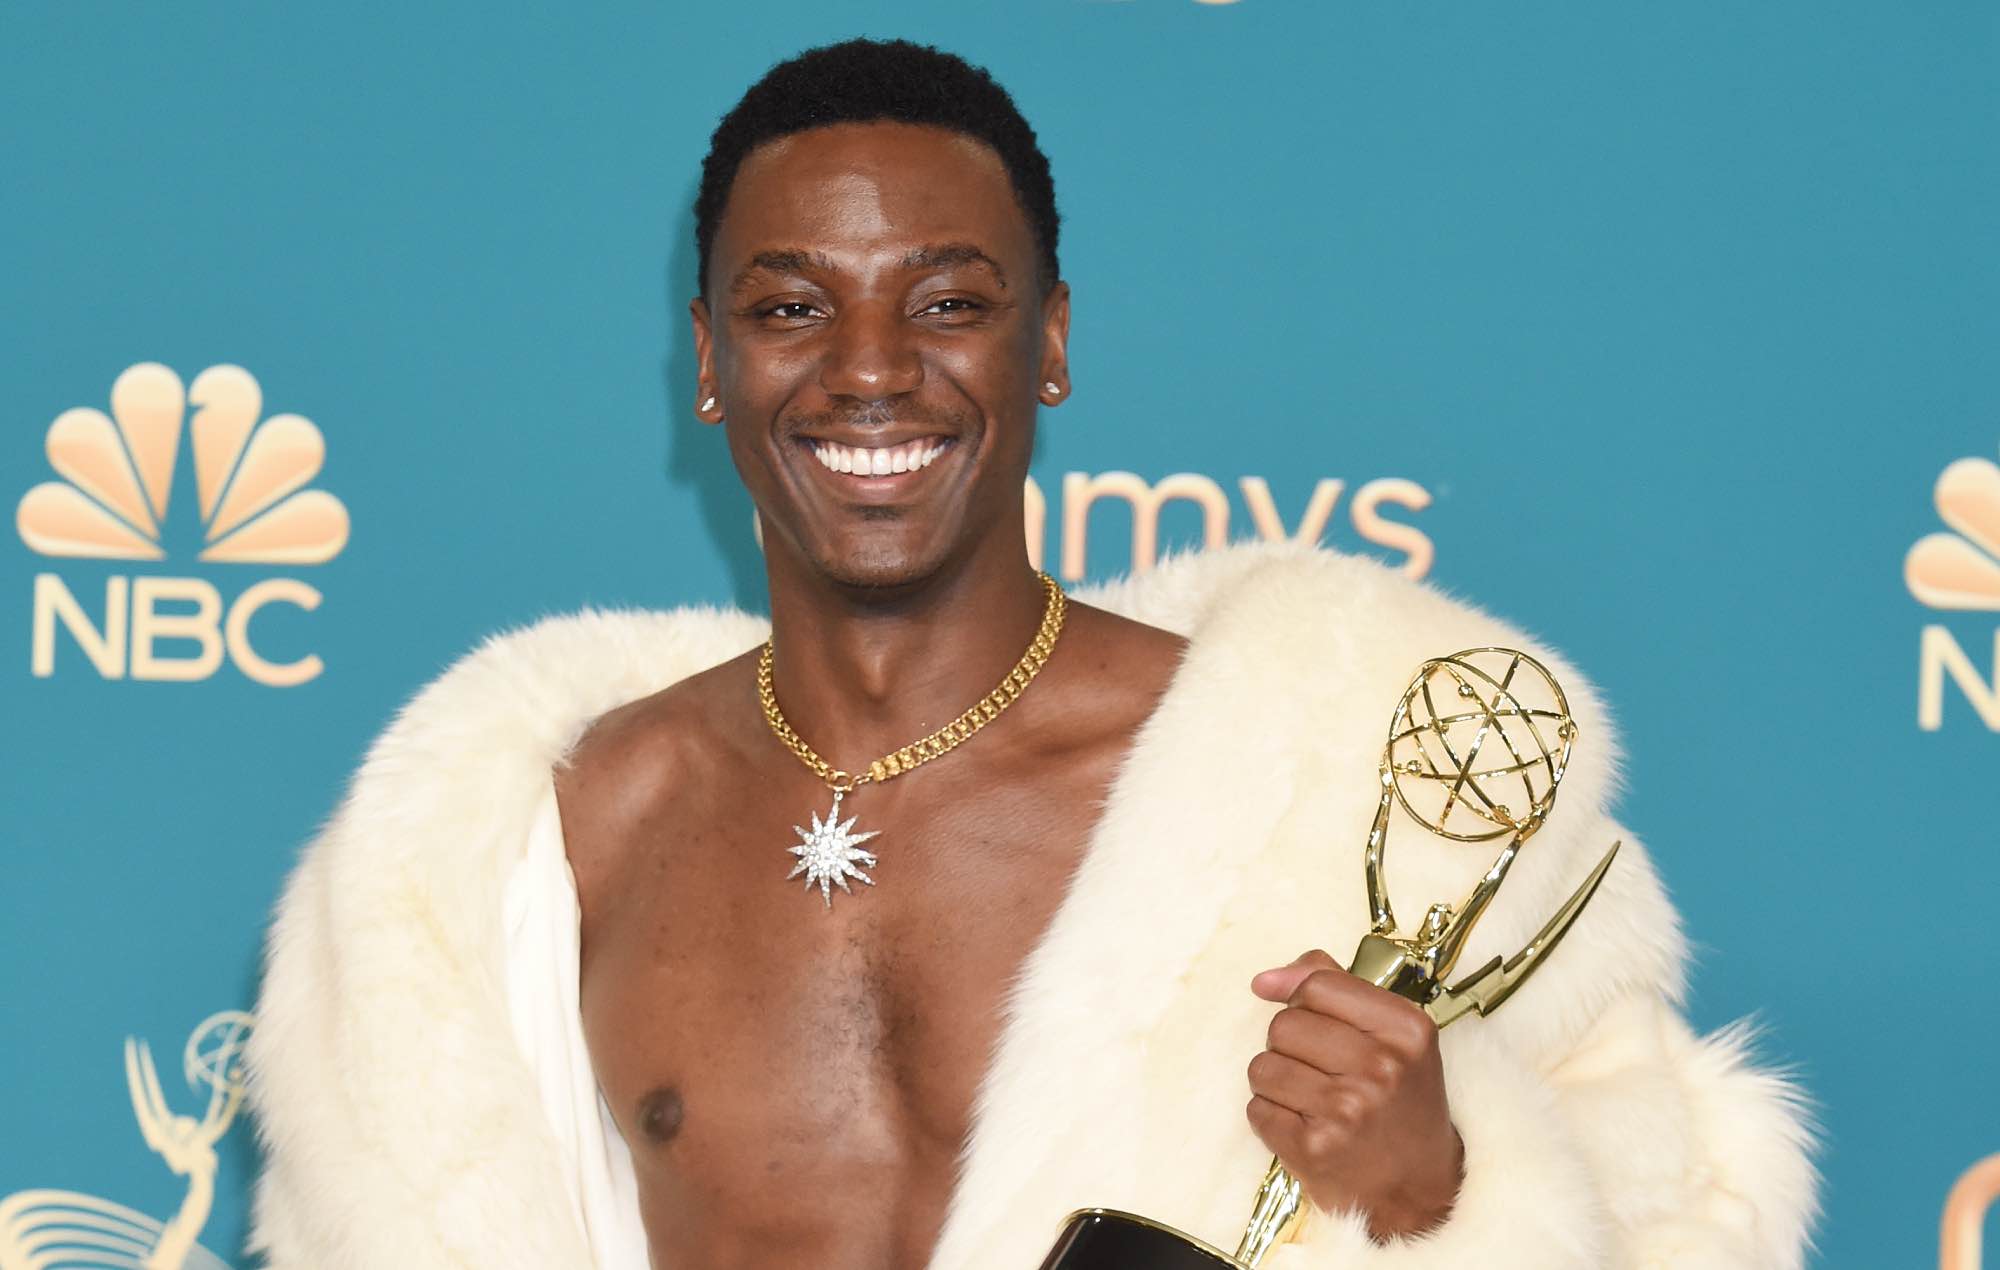 Comedian Jerrod Carmichael calls Dave Chappelle an “egomaniac” and doubles down on criticism of anti-trans legacy